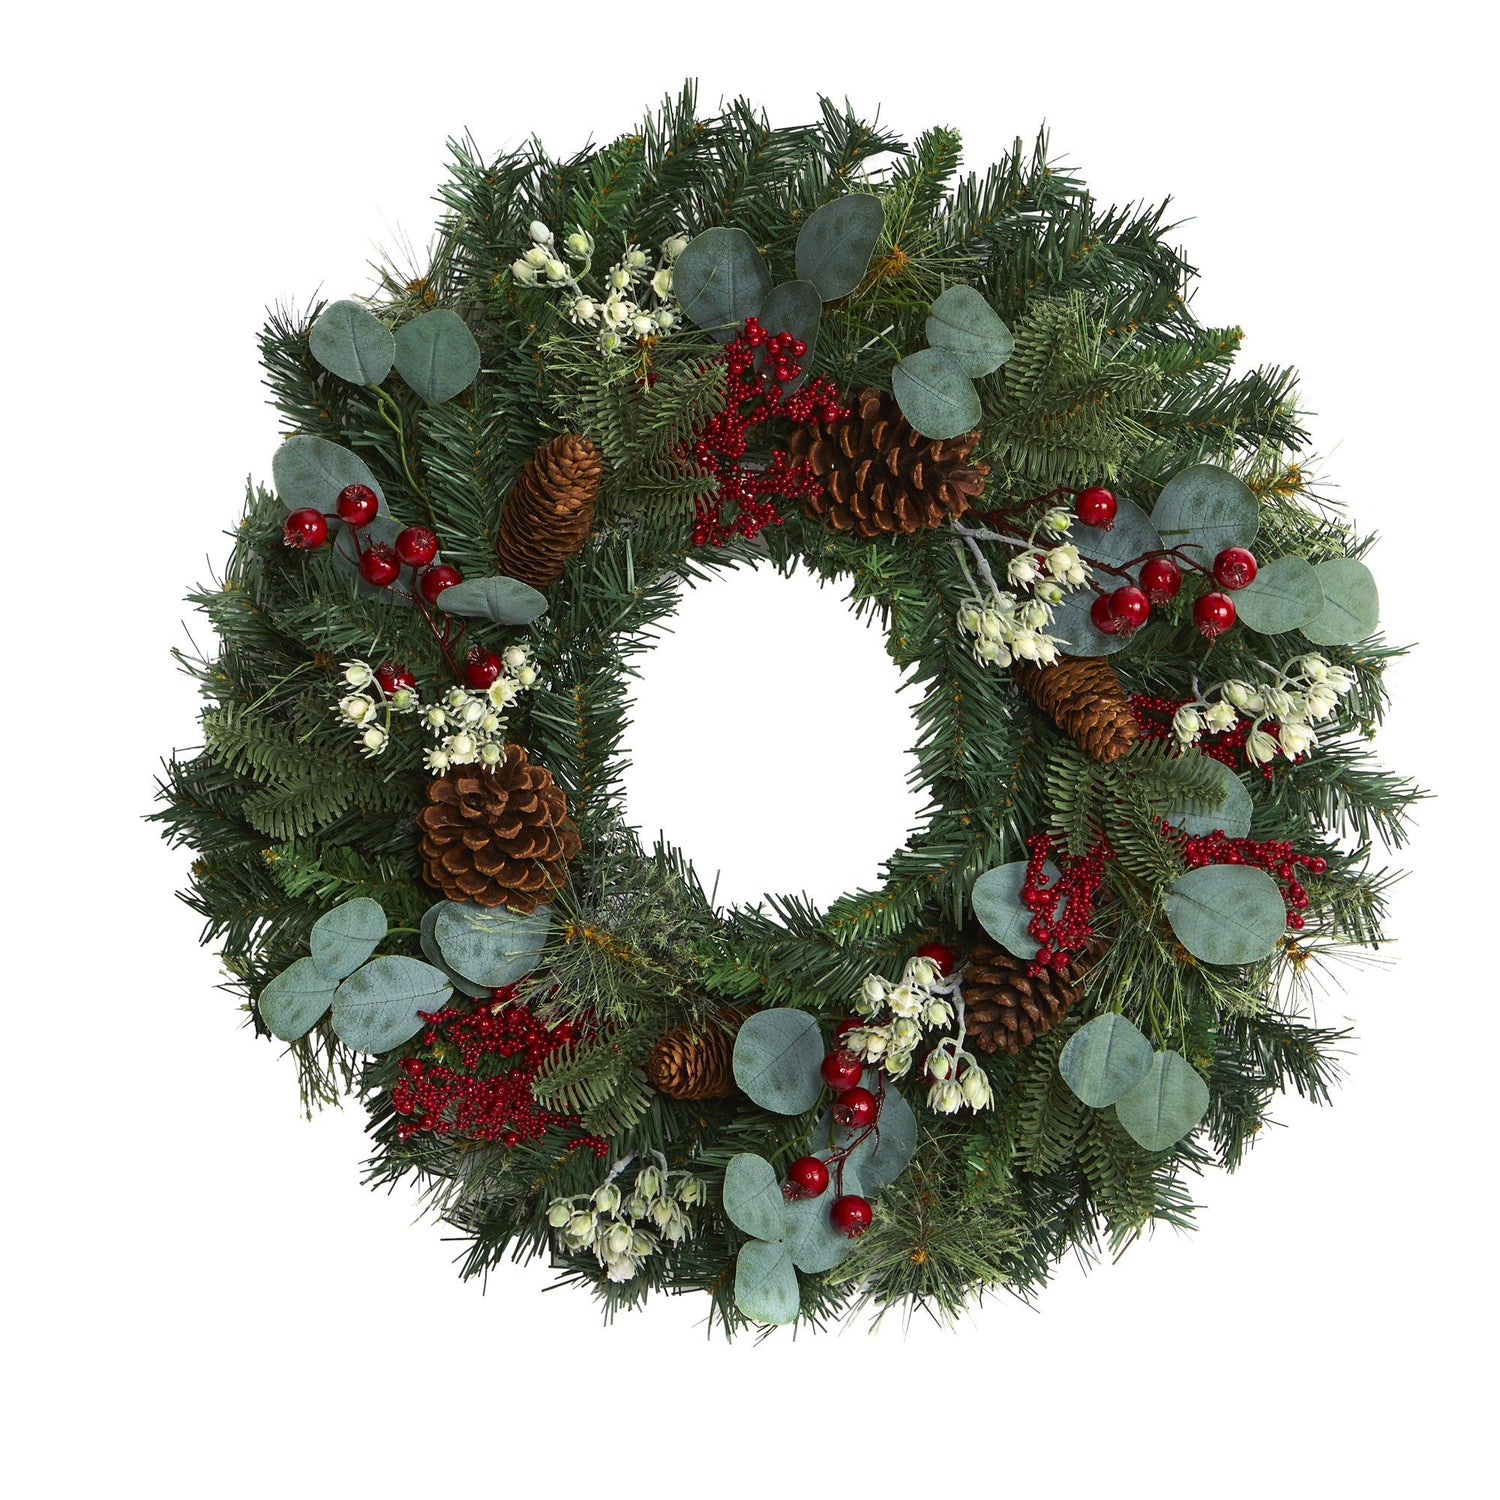 24” Eucalyptus and Pine Artificial Wreath with Berries and Pine Cones